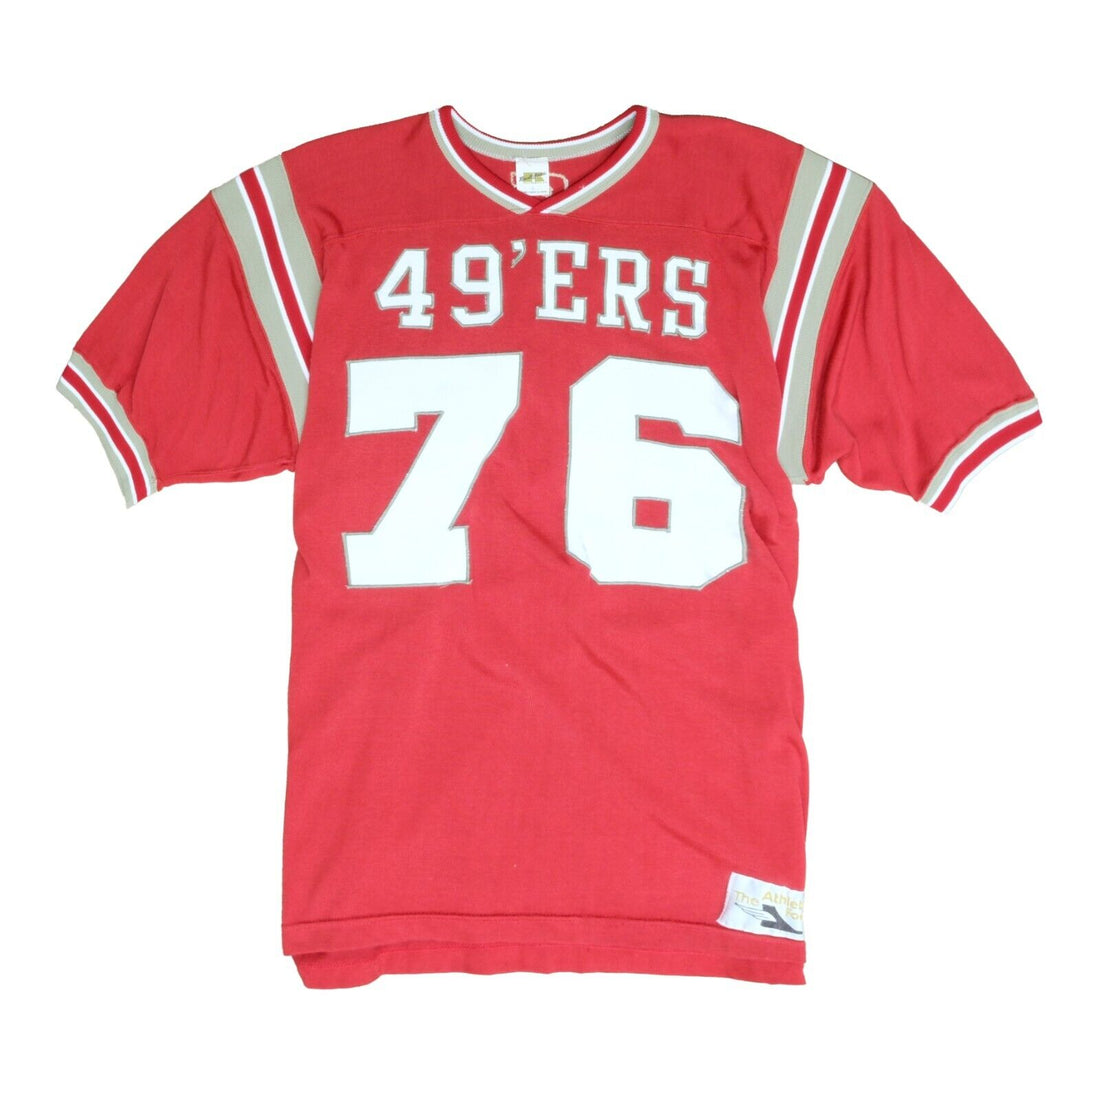 Vintage San Francisco 49ers Russell Athletic Football Jersey Size Large 90s NFL